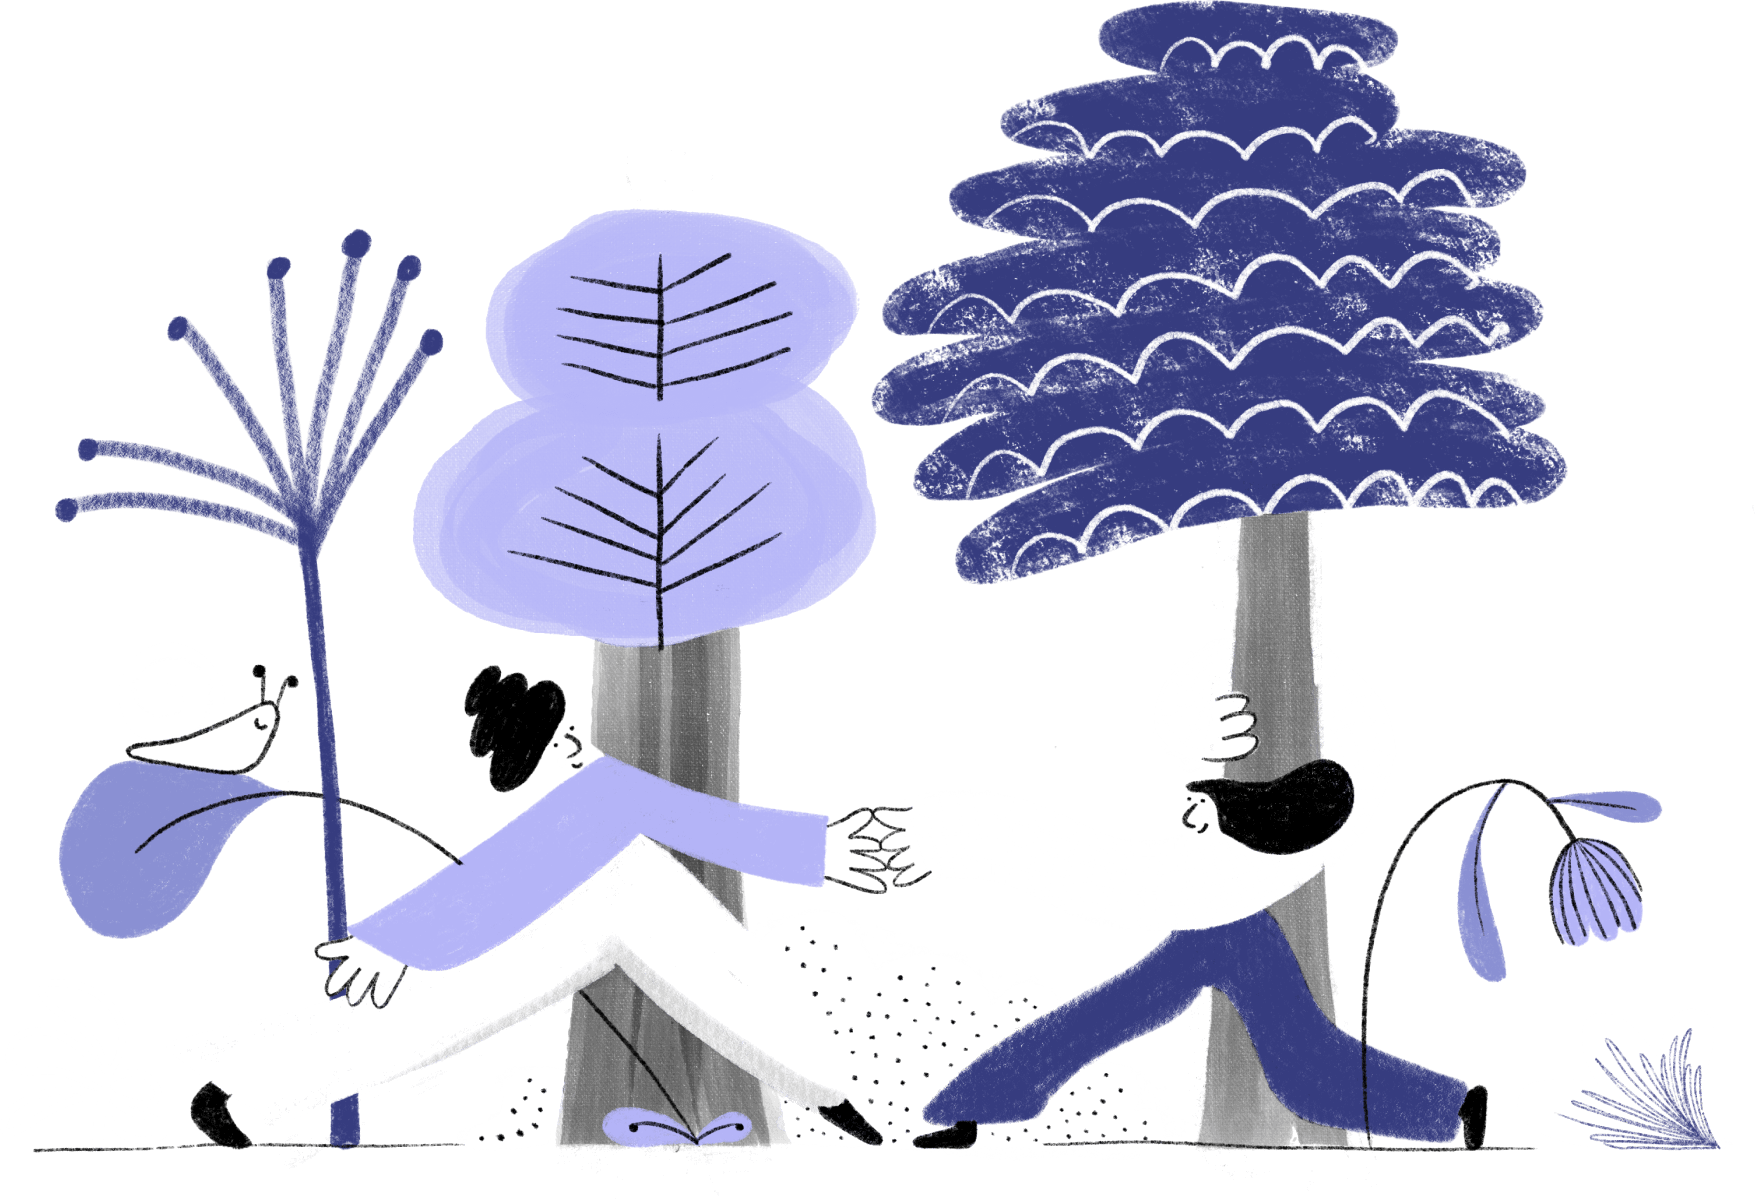 Illustration of two people helping each other in a nature setting